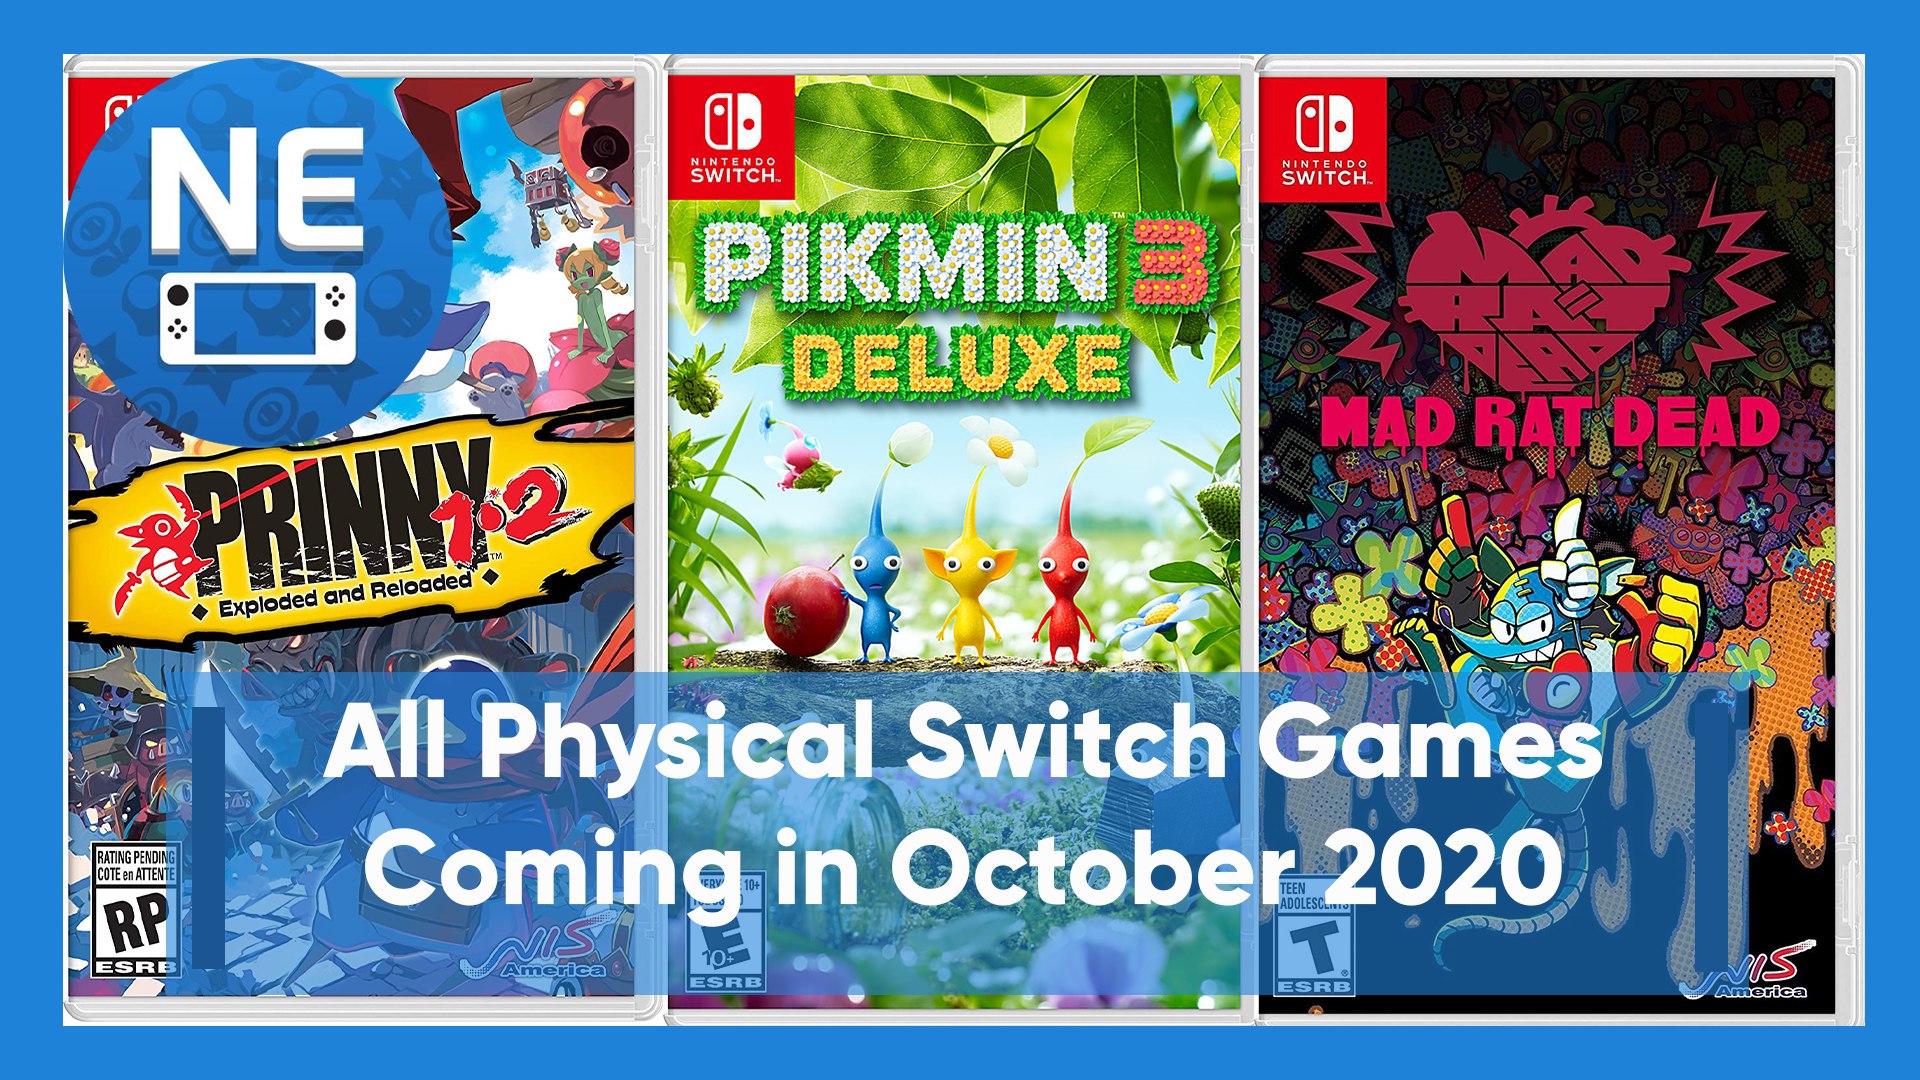 switch games coming up